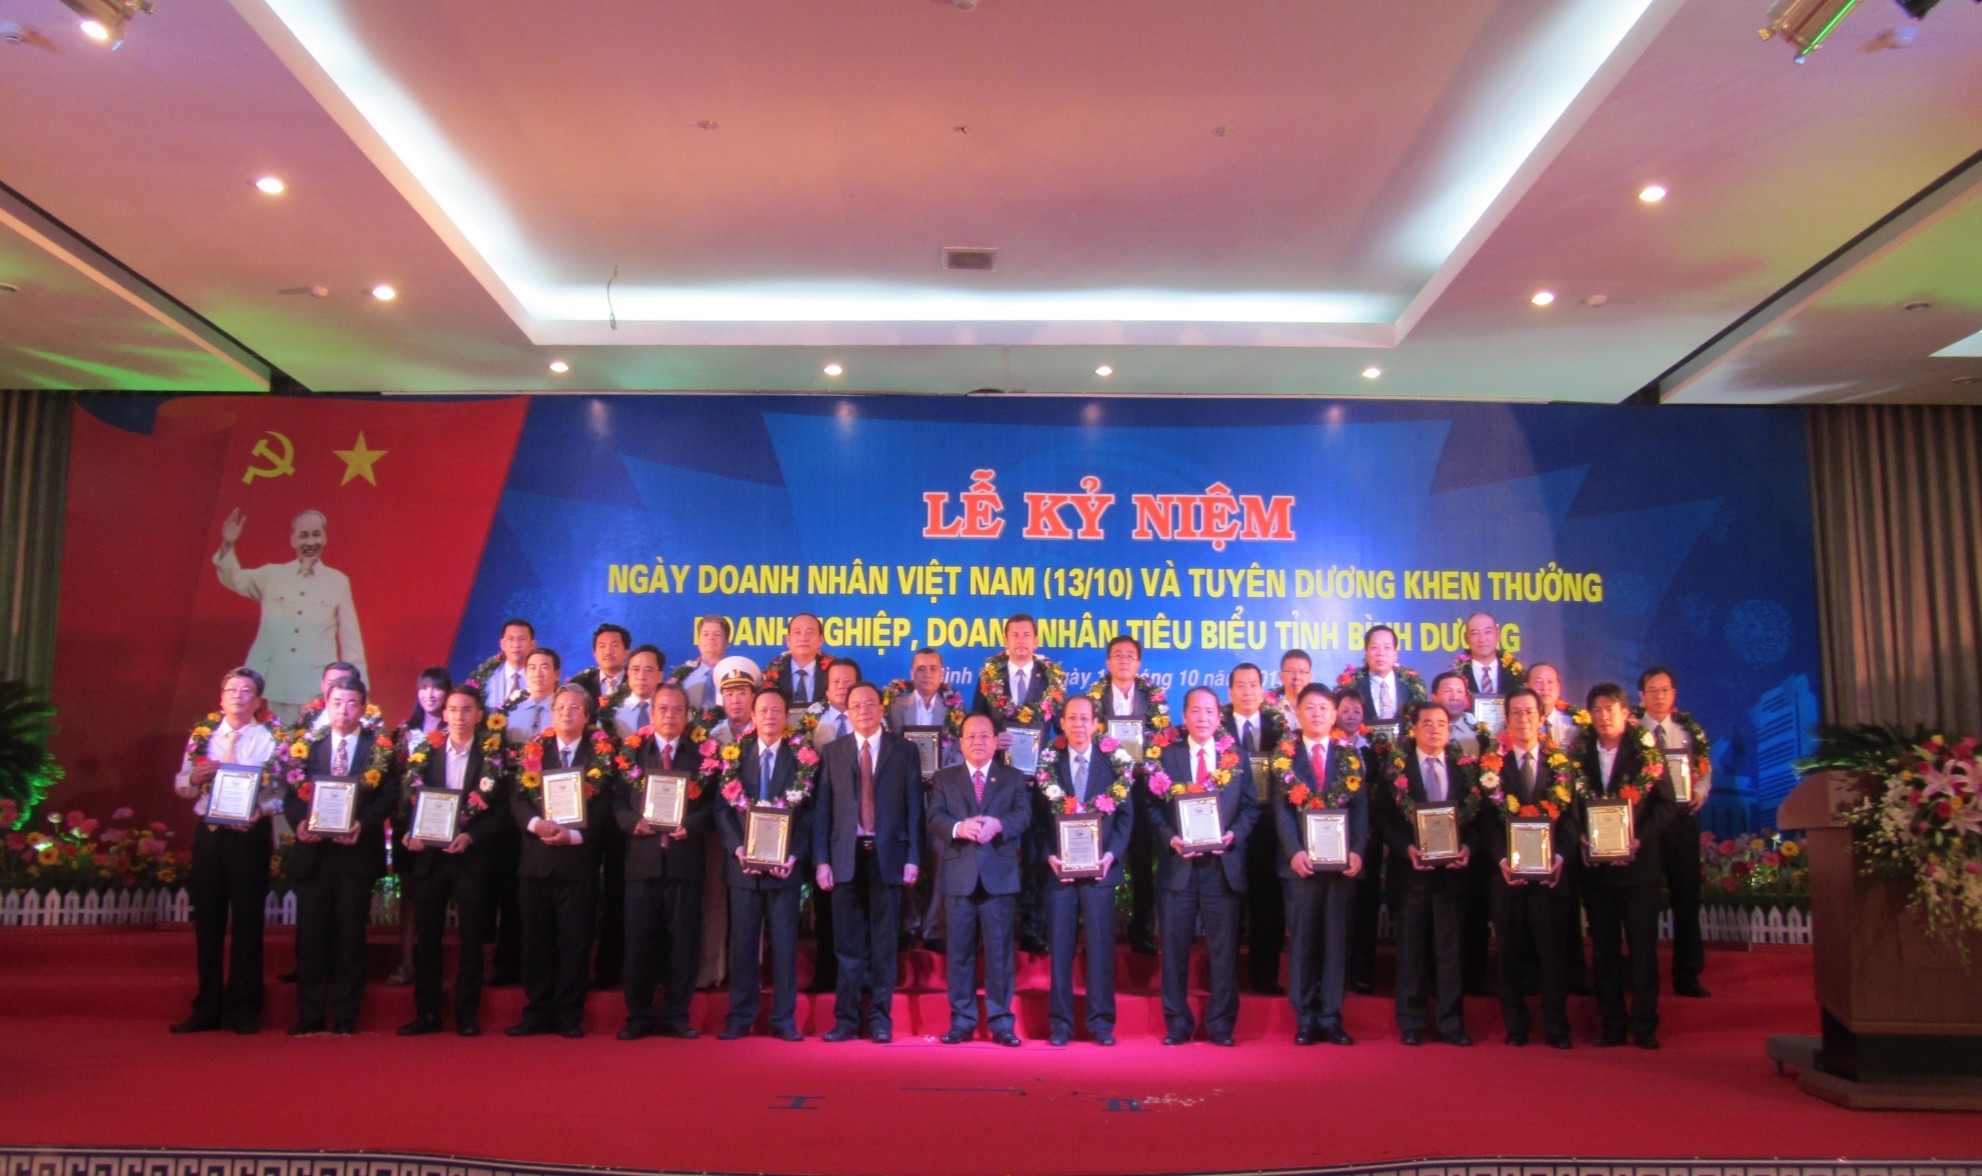 On 11/10/2013, GS Battery Vietnam Co.,Ltd was invited to join and get the certificate of the merit by the People’s Committee of Binh Duong Province on occasion of the Vietnamese Entrepreneur Day Ceremony ( 13/10/2004 – 13/10/2013)